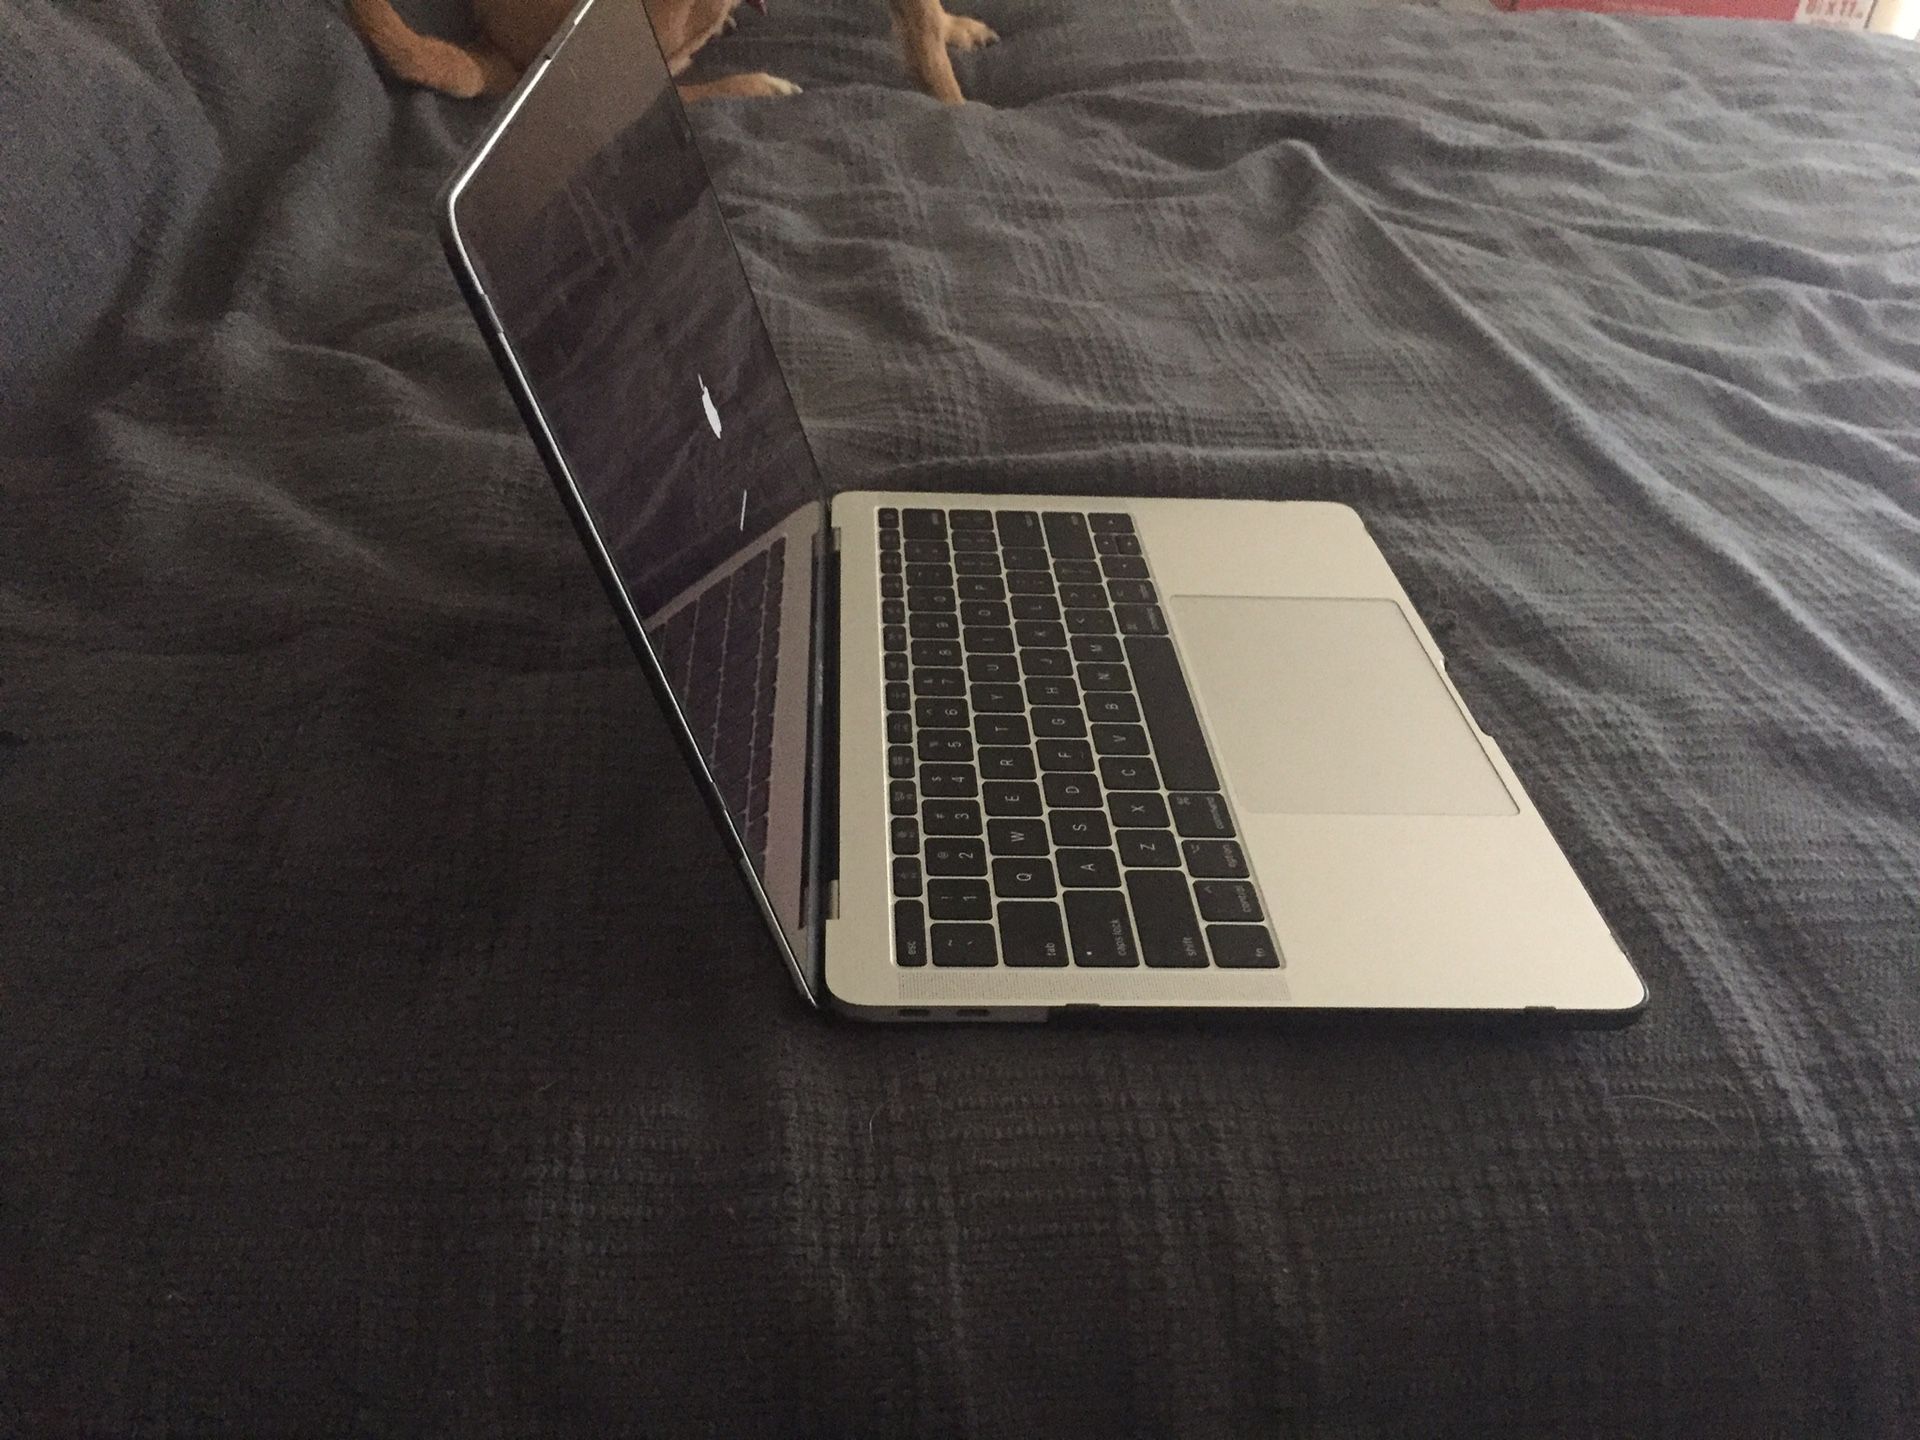 2018-2019 Apple MacBook Pro without Touch Bar